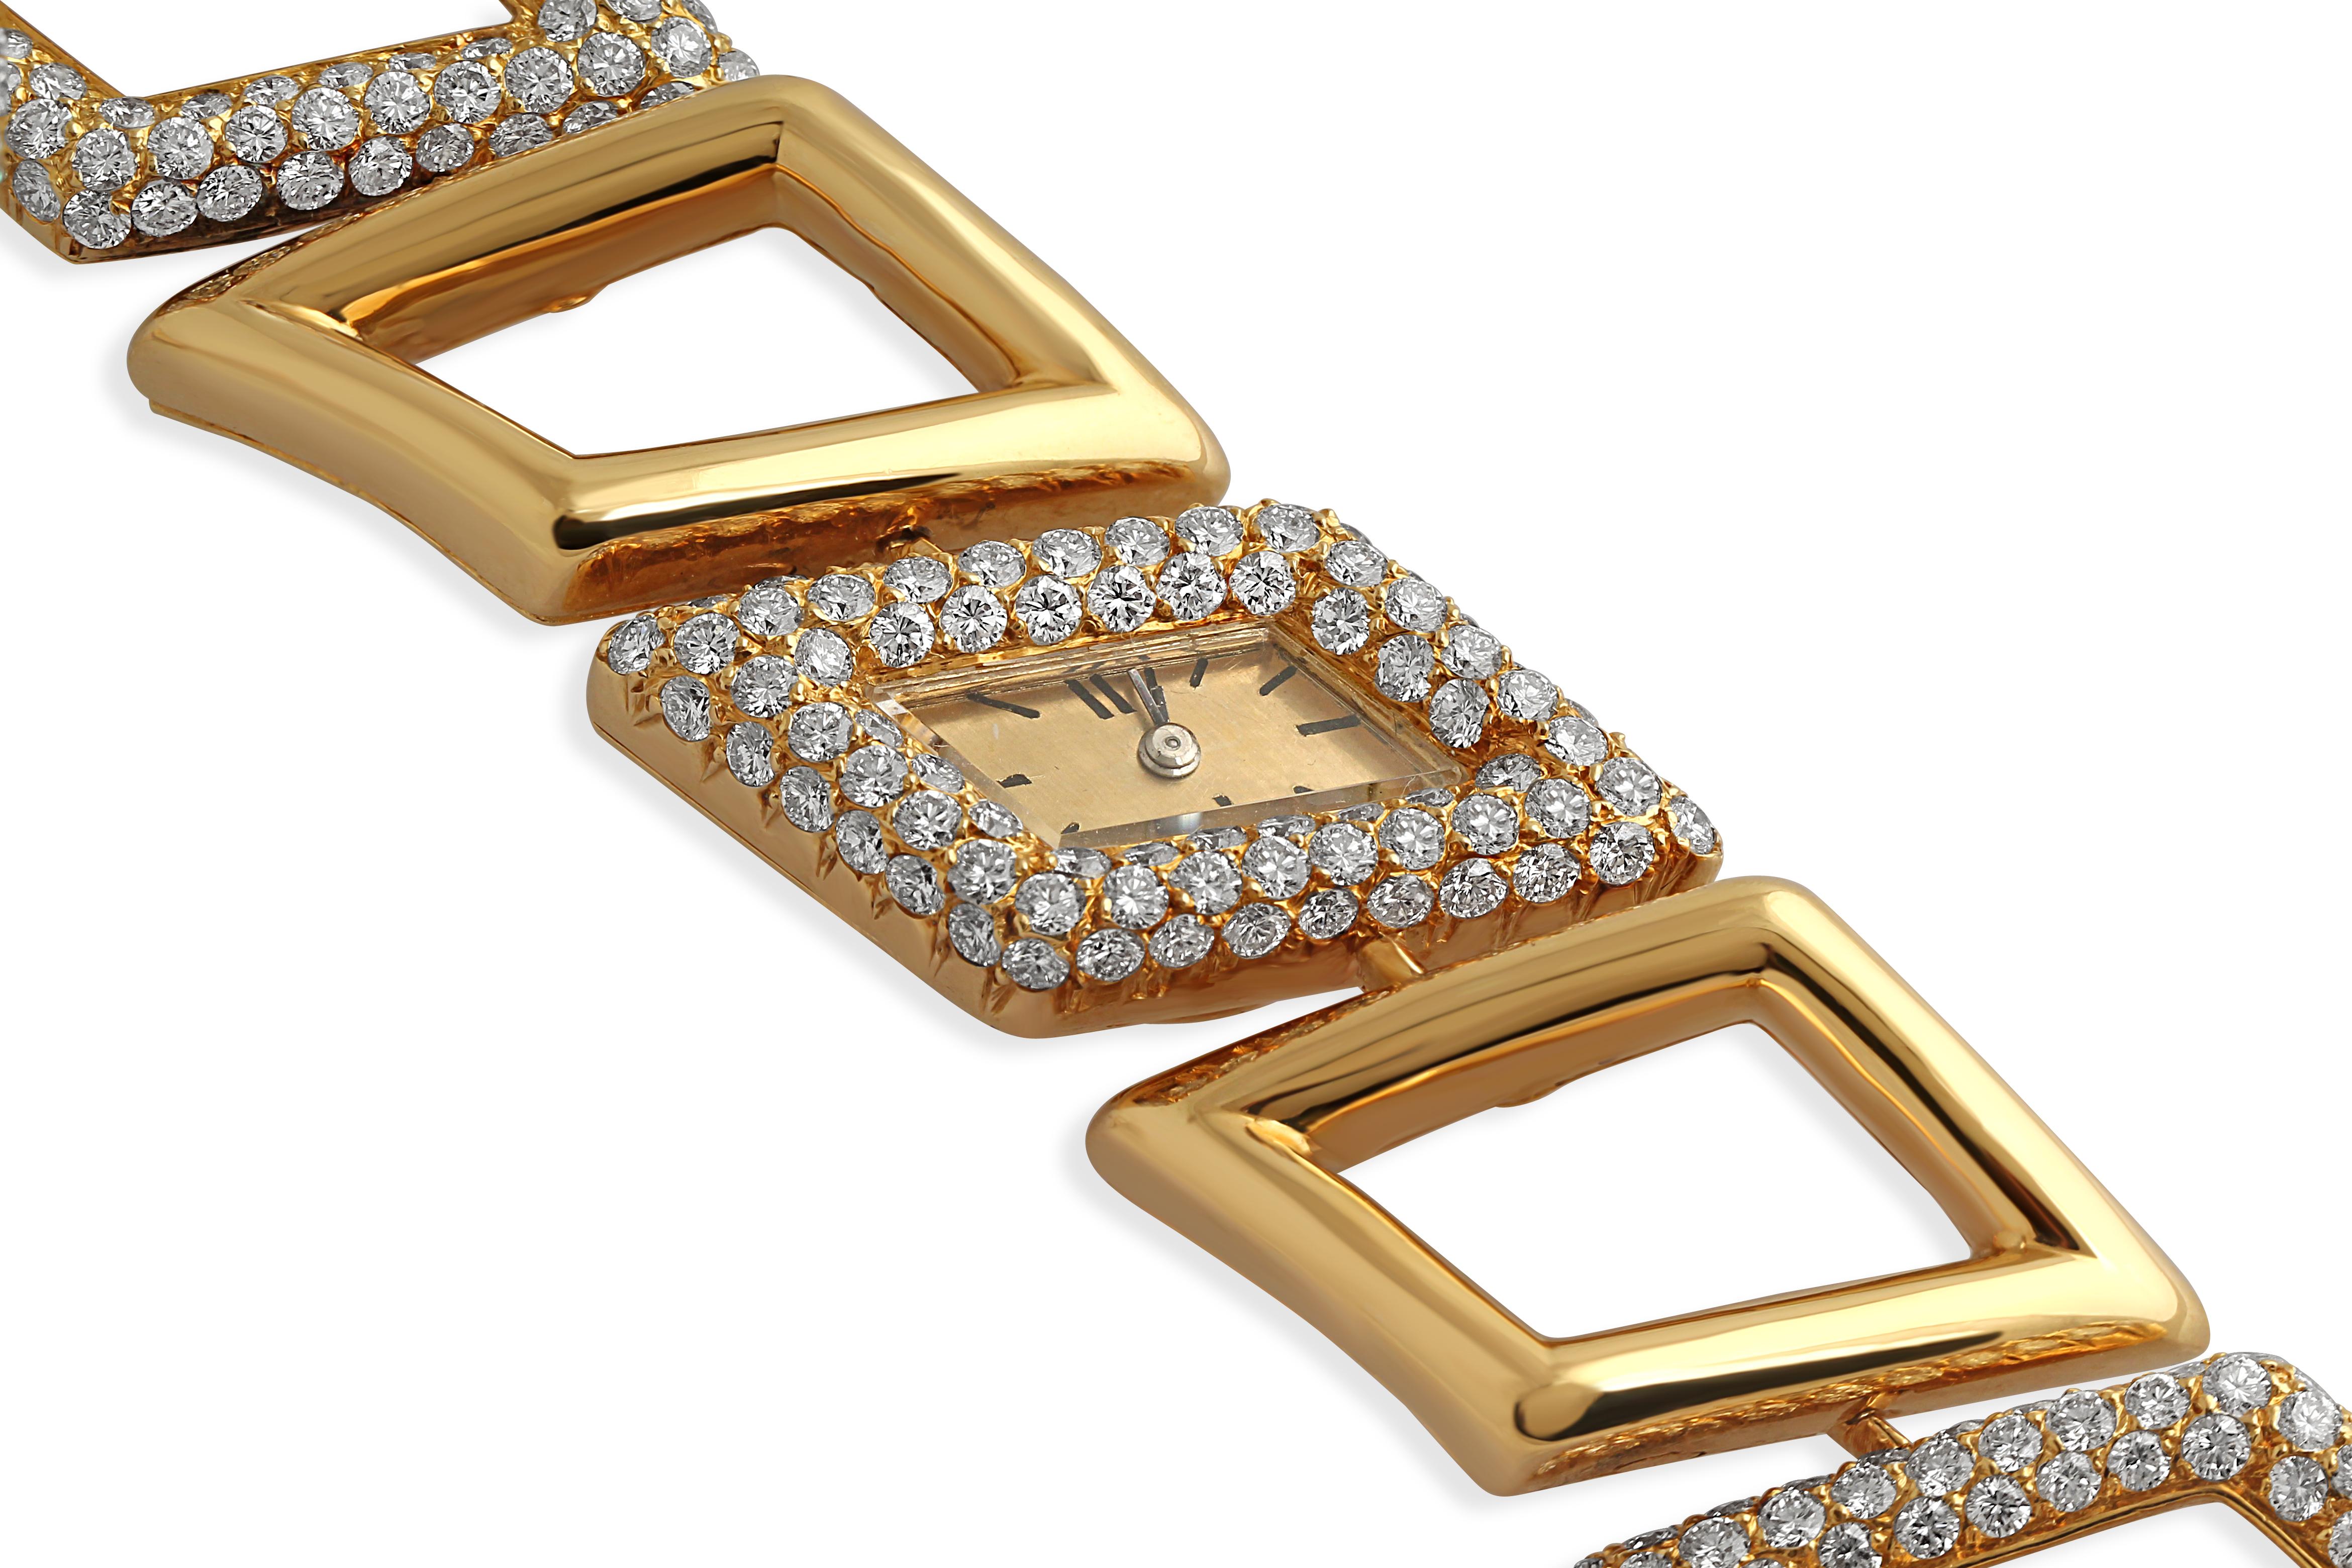 A glamorous 18k yellow gold ladies wristwatch by M.Gerard. Set with approximately 8.50 carats of diamonds. Weight = 71gr.